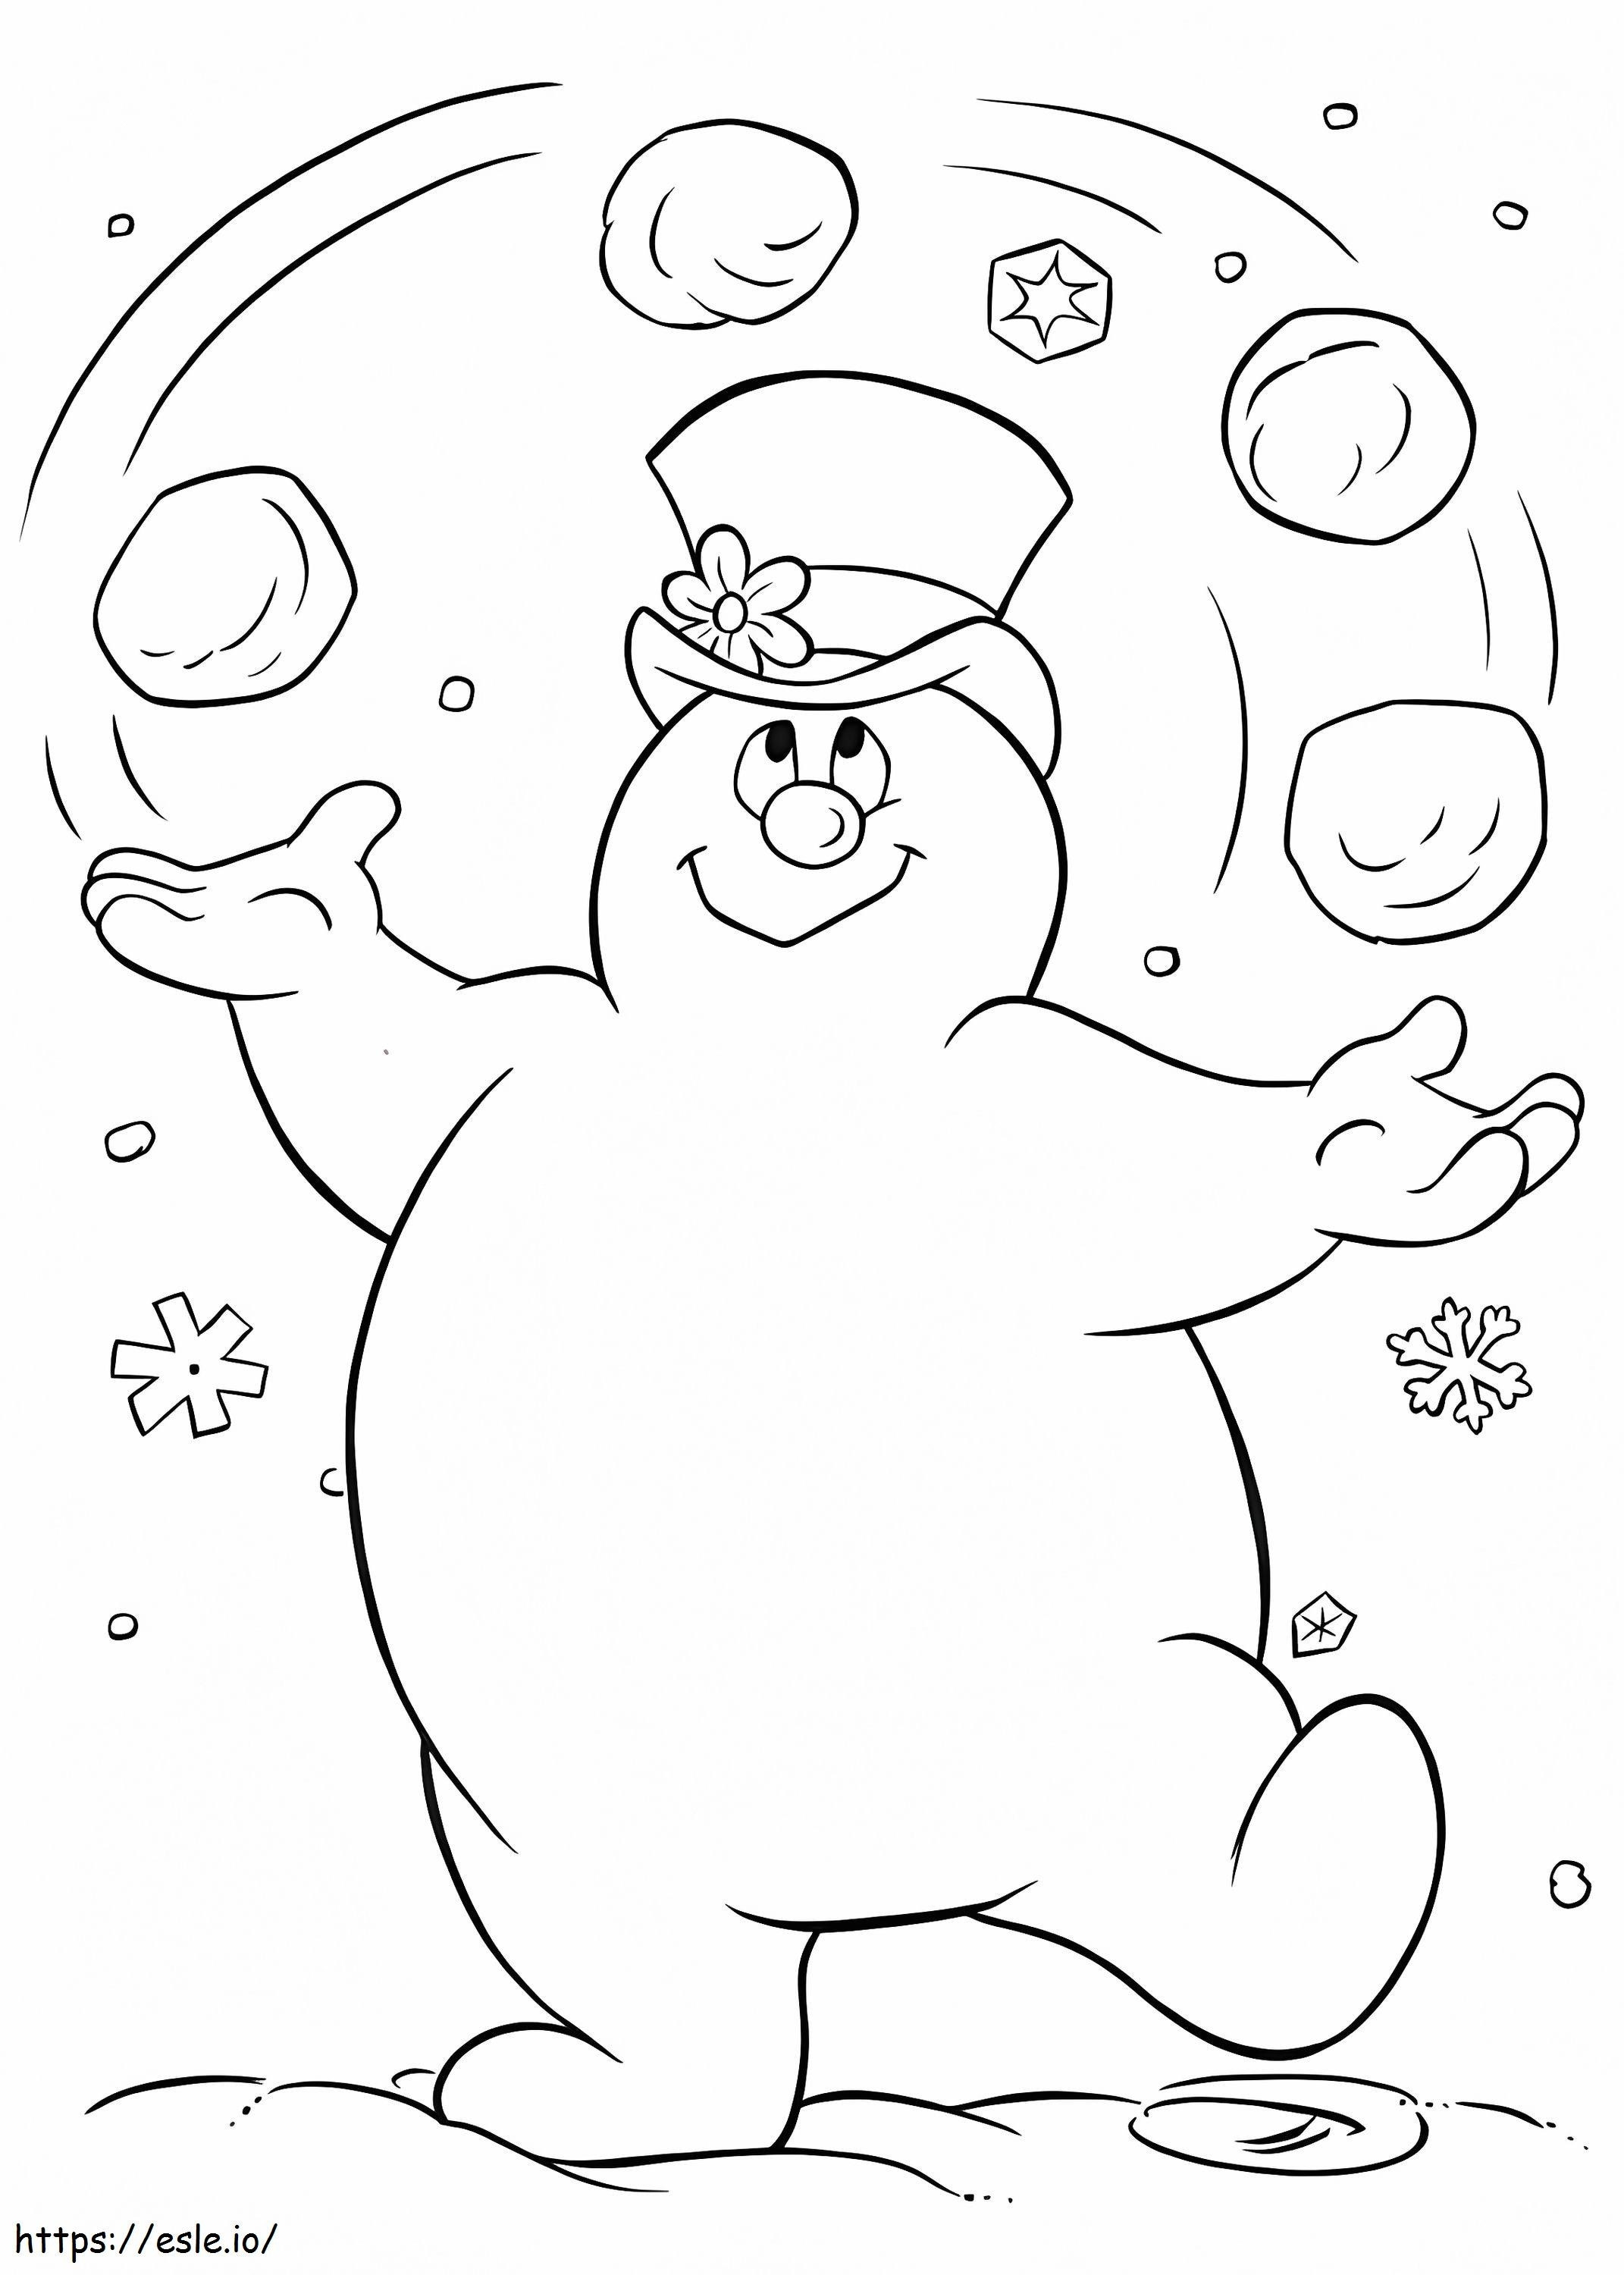 1535705441 Frosty Playing Snowball A4 coloring page